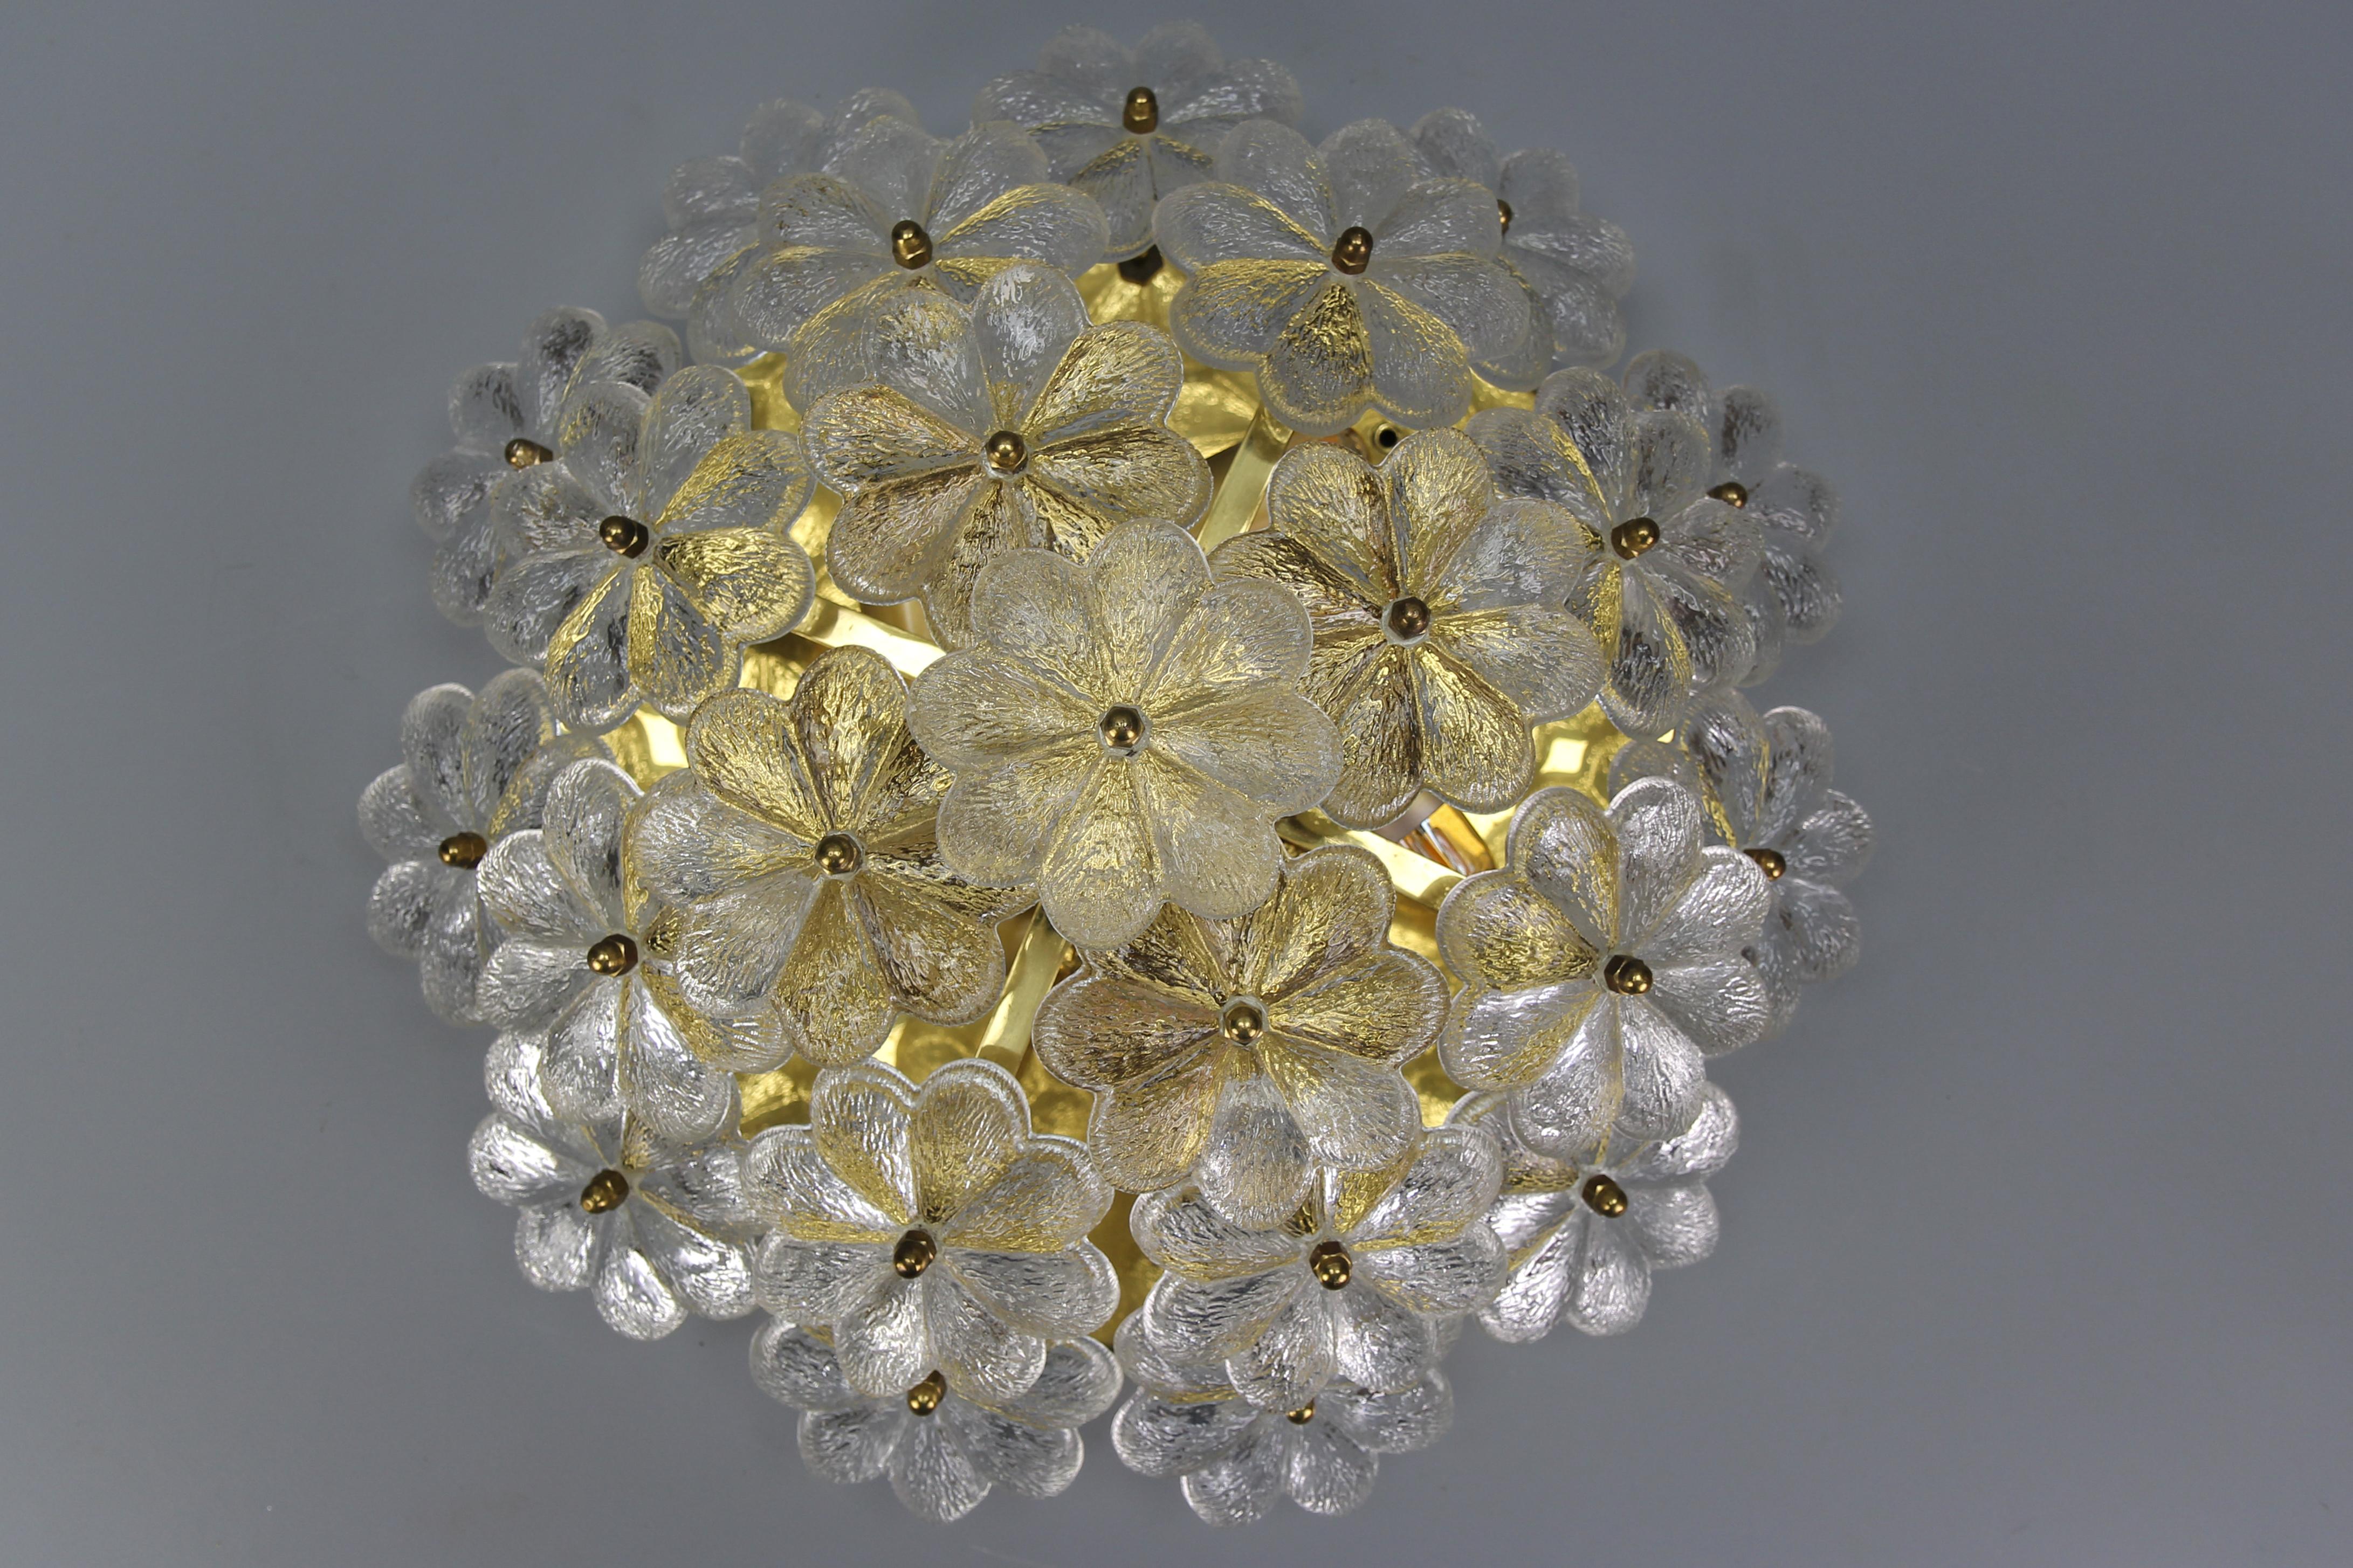 Murano glass flower and brass flush mount by Ernst Palme, Germany, 1970s.
This beautiful Mid-Century Modern period flush mount by Ernst Palme features a brass frame and 24 thick clear Murano glass flowers. The light fixture can be used as a wall